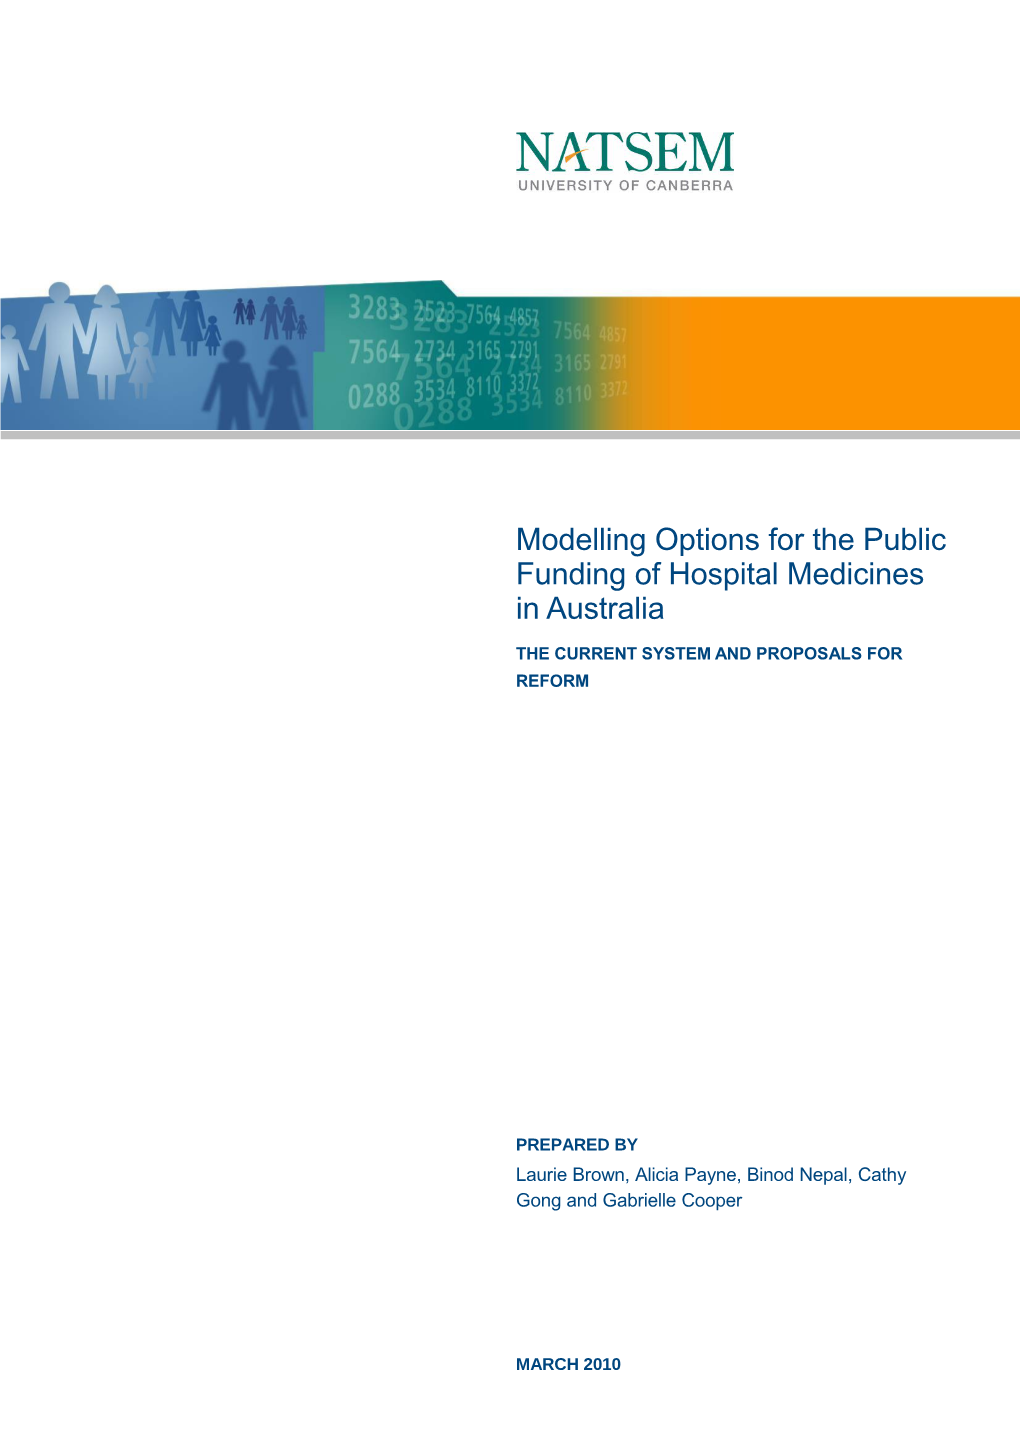 Modelling Options for the Public Funding of Hospital Medicines in Australia